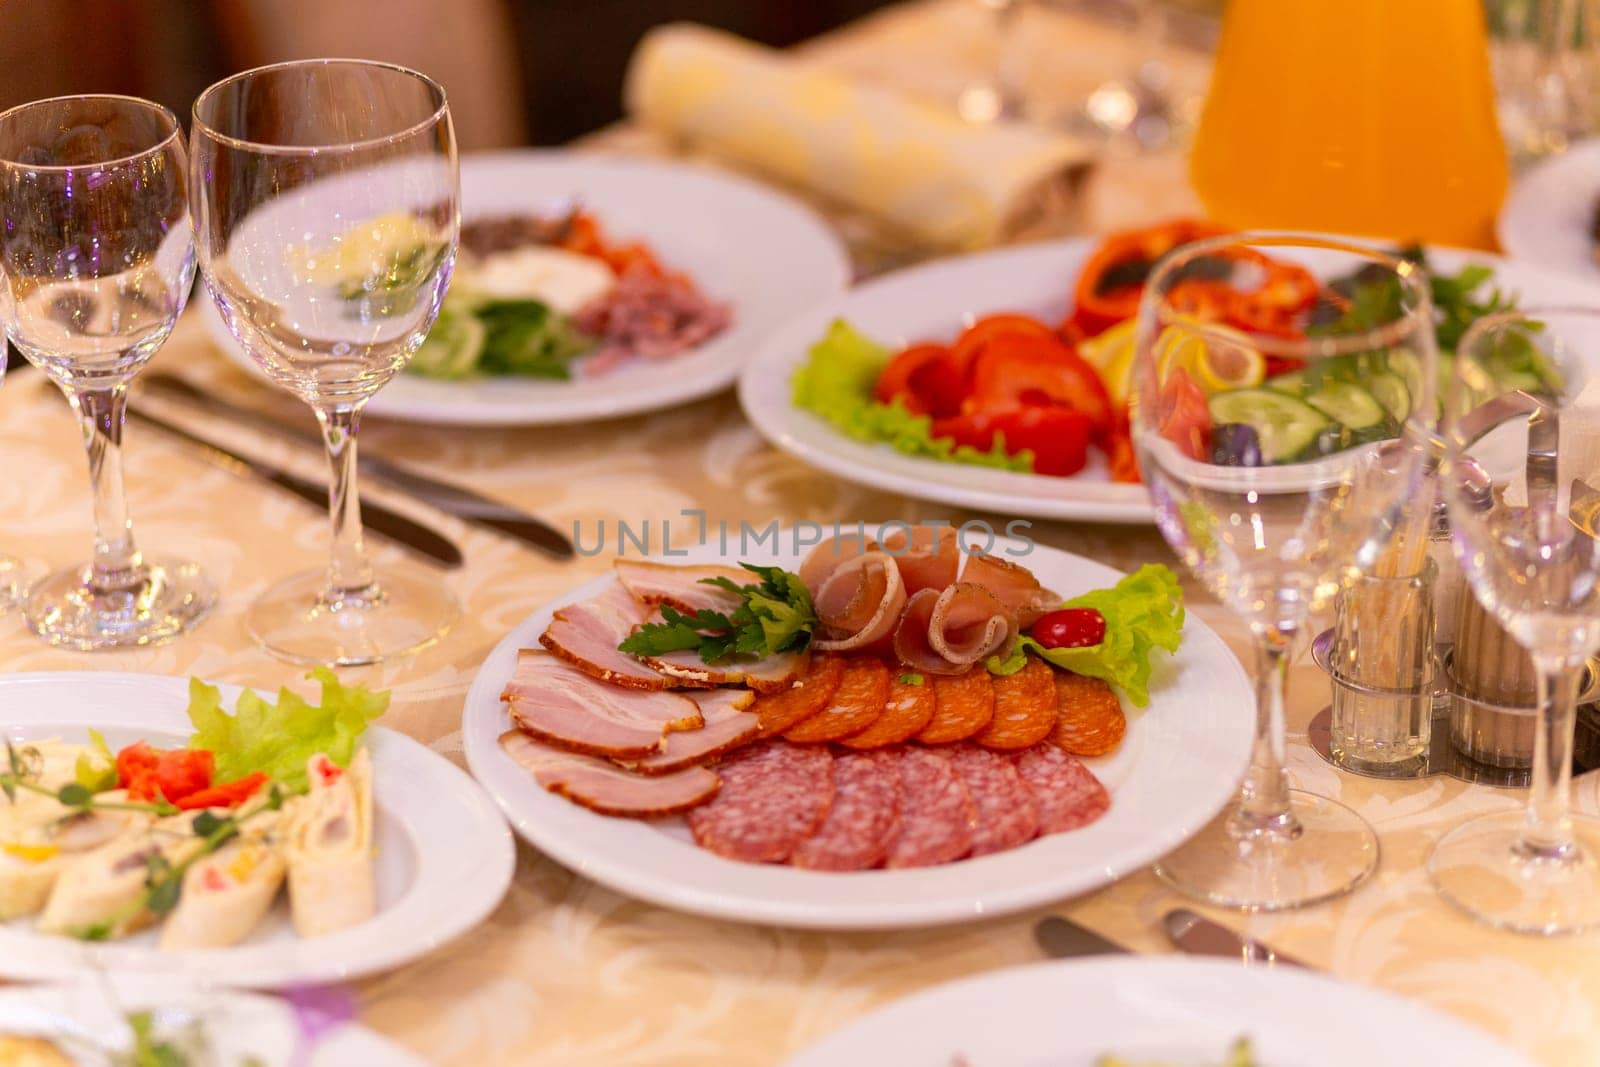 Served festive table with snacks, glasses, glasses, cutlery and napkins for a banquet by BY-_-BY